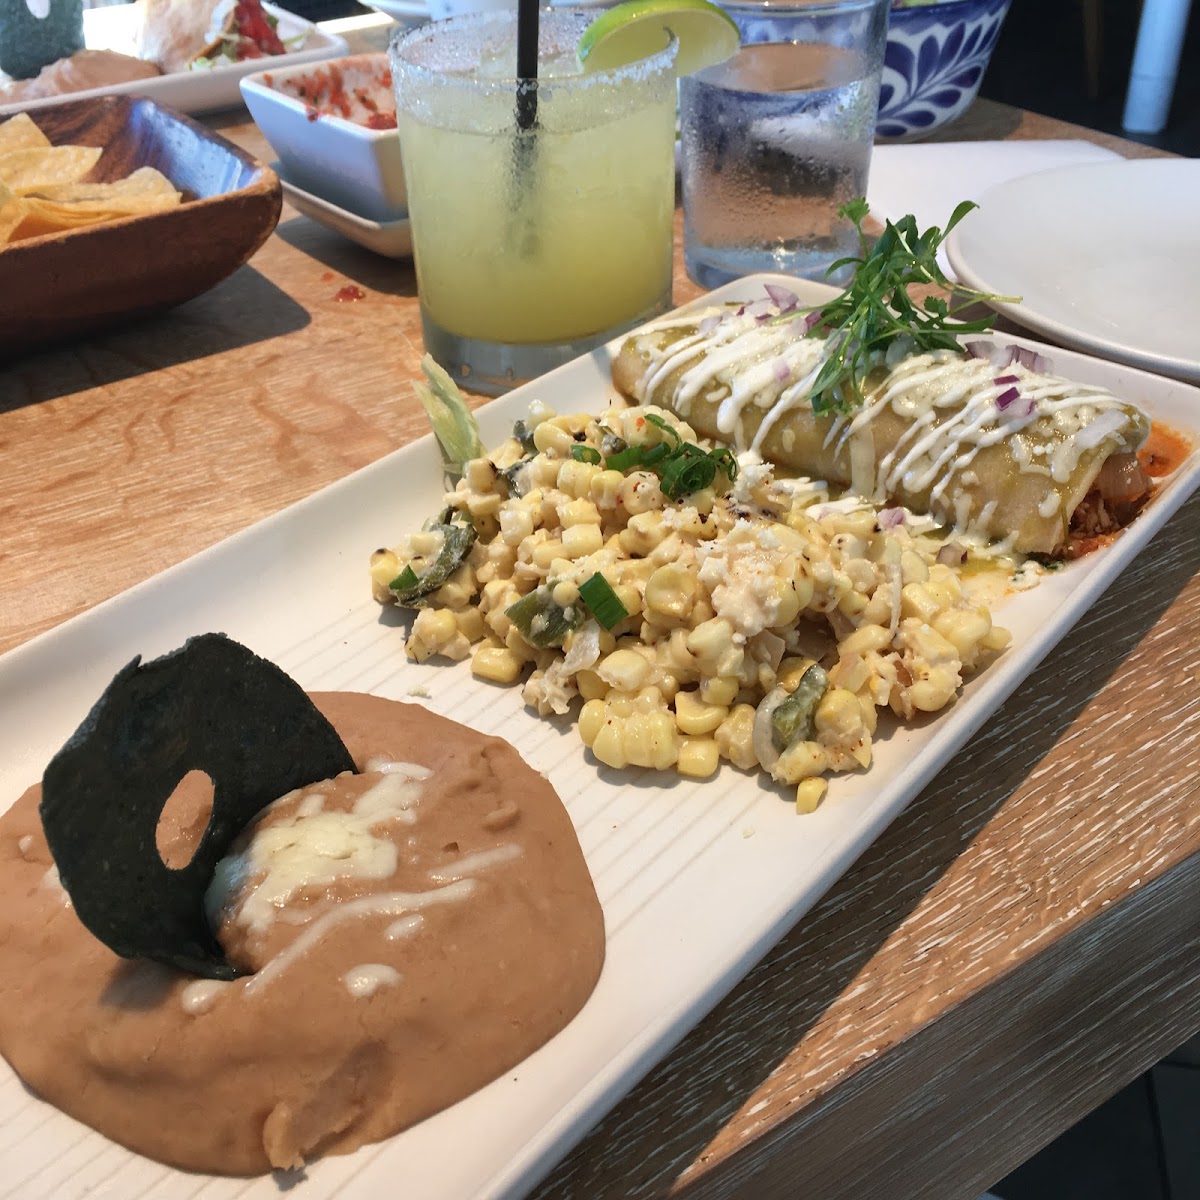 Chicken enchilada with street corn and refried beans and a cucumber margarita with Don Julio subbed. So good.